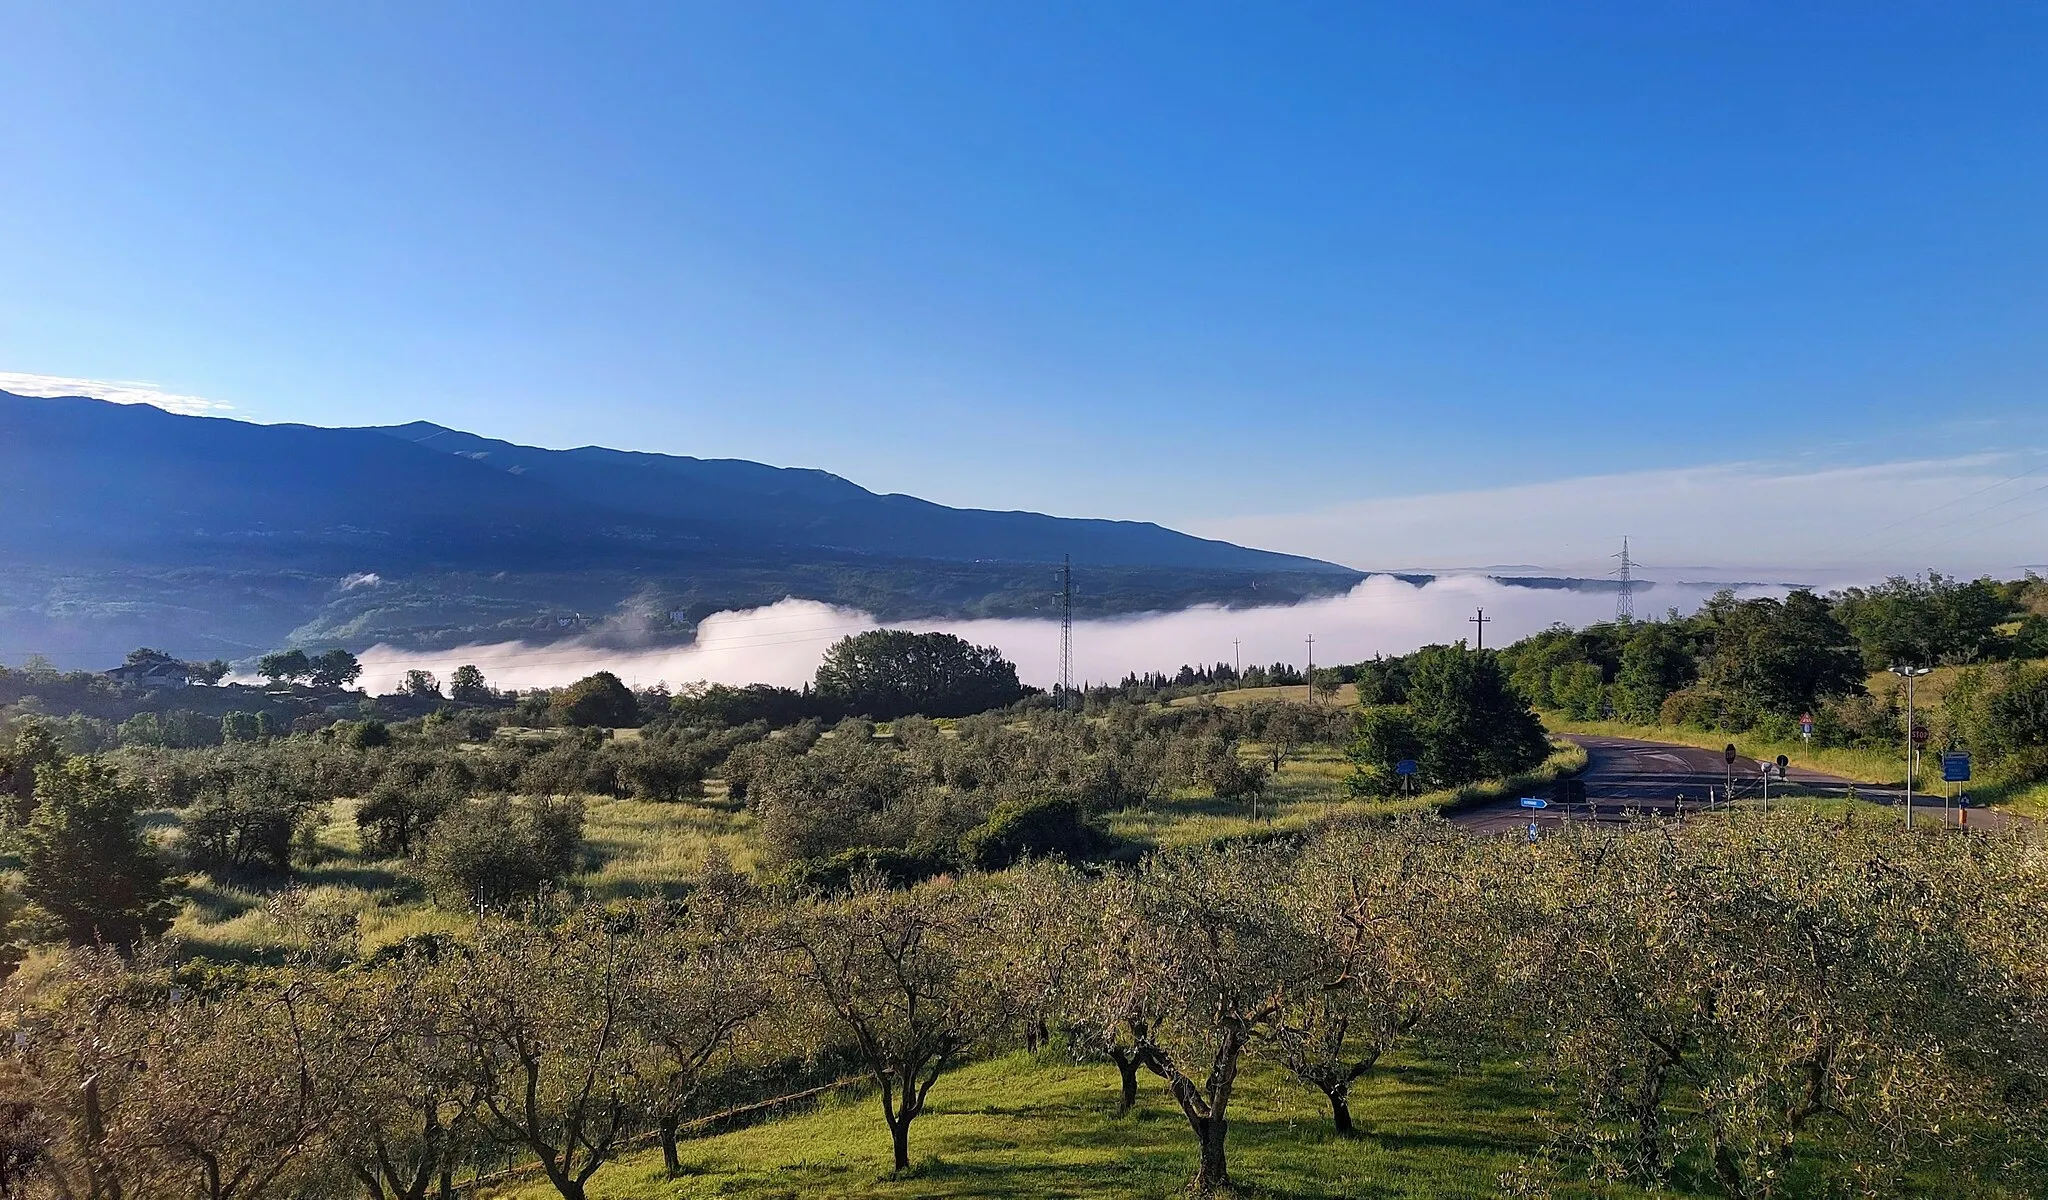 Photo showing: The mists over the Valdarno Fiorentino valley